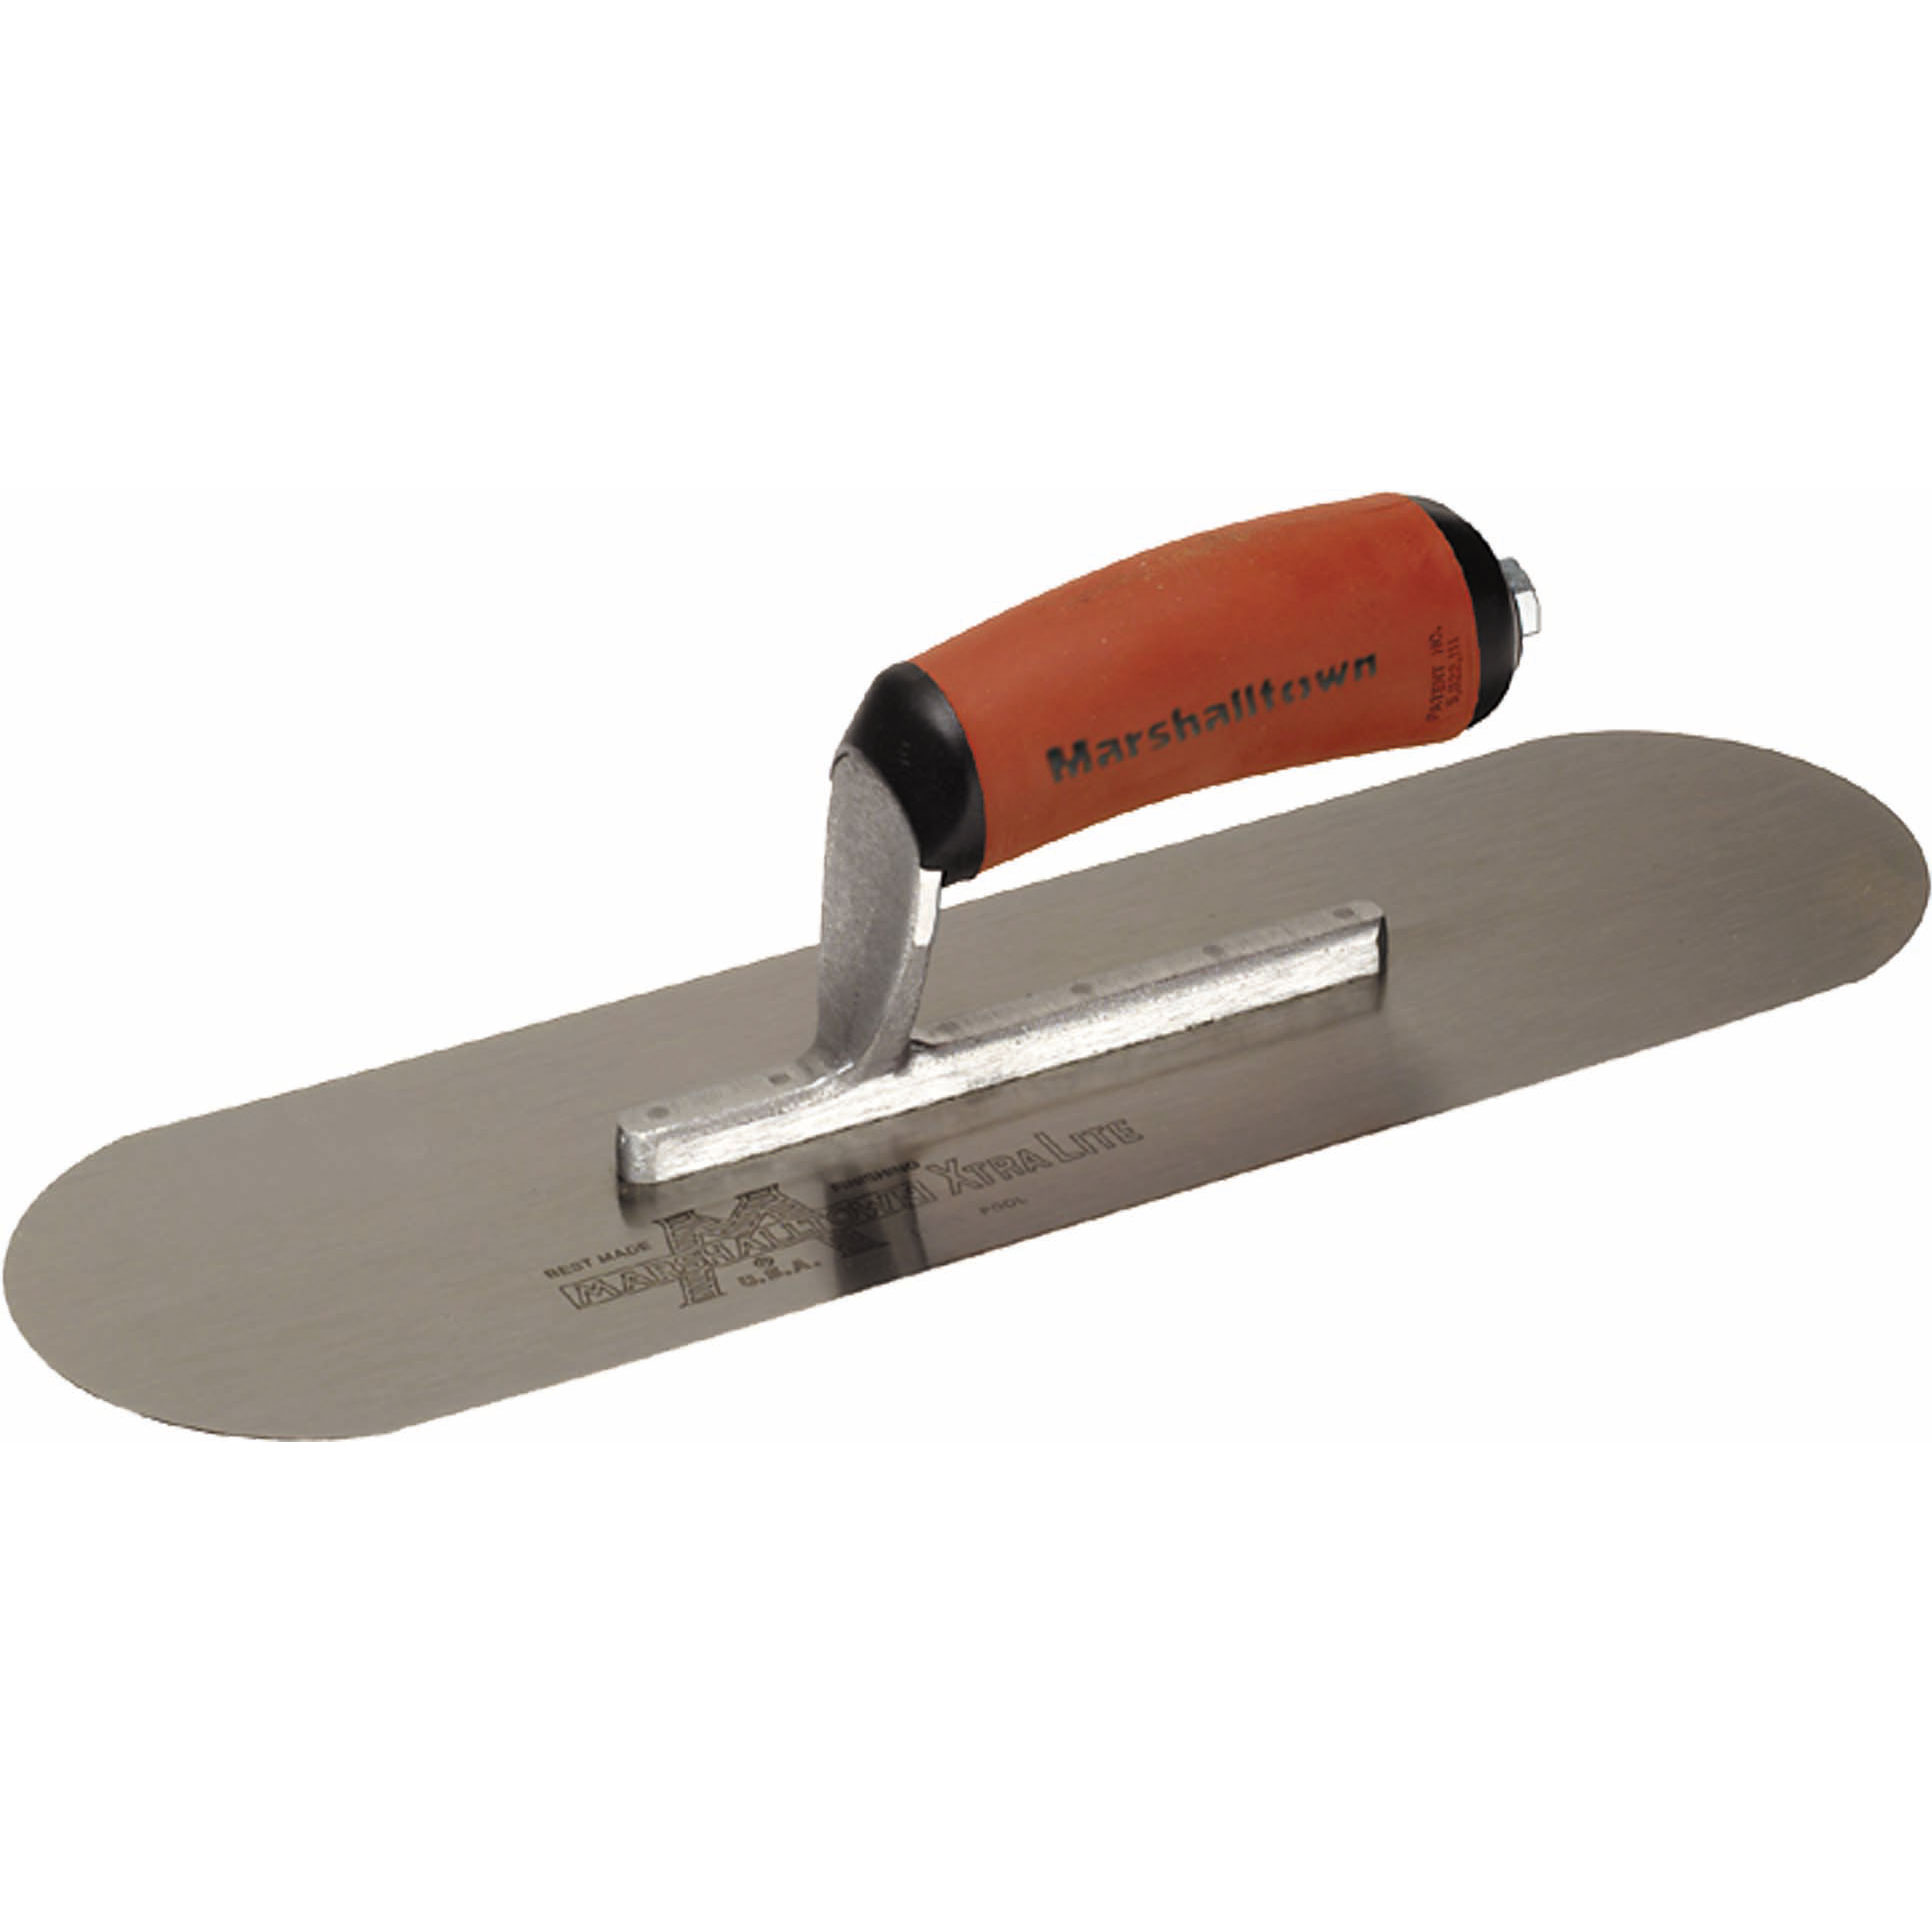 Marshalltown SP14SD 14in x 4in Pool Trowel with DuraSoft Handle SP14SD